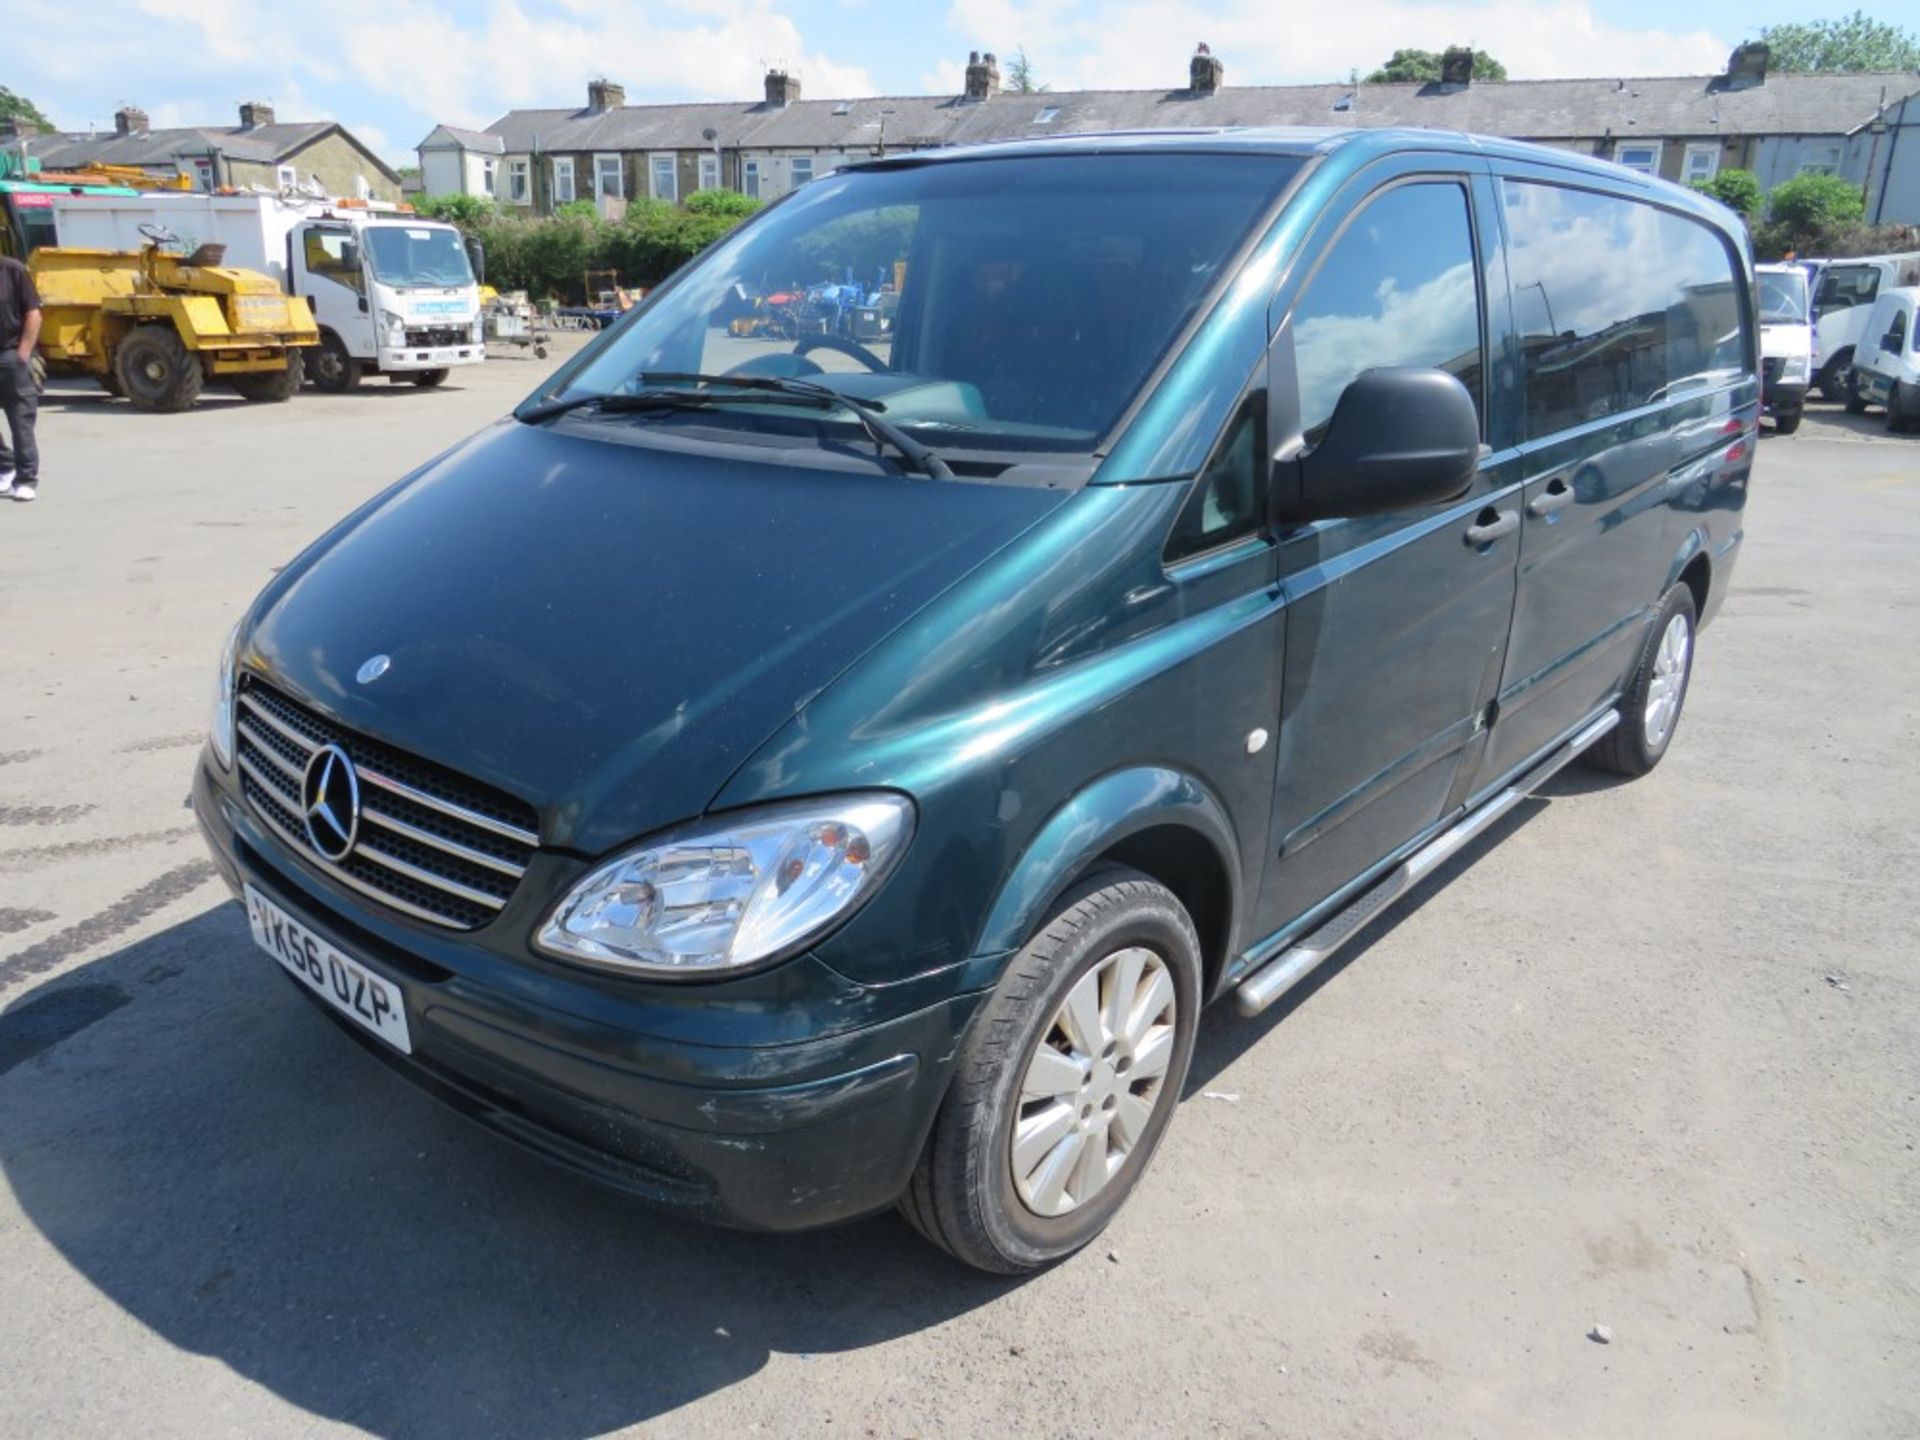 56 reg MERCEDES VITO 111 CDI LONG, 321099M NOT WARRANTED, V5 HERE, 2 FORMER KEEPERS [NO VAT] - Image 2 of 8